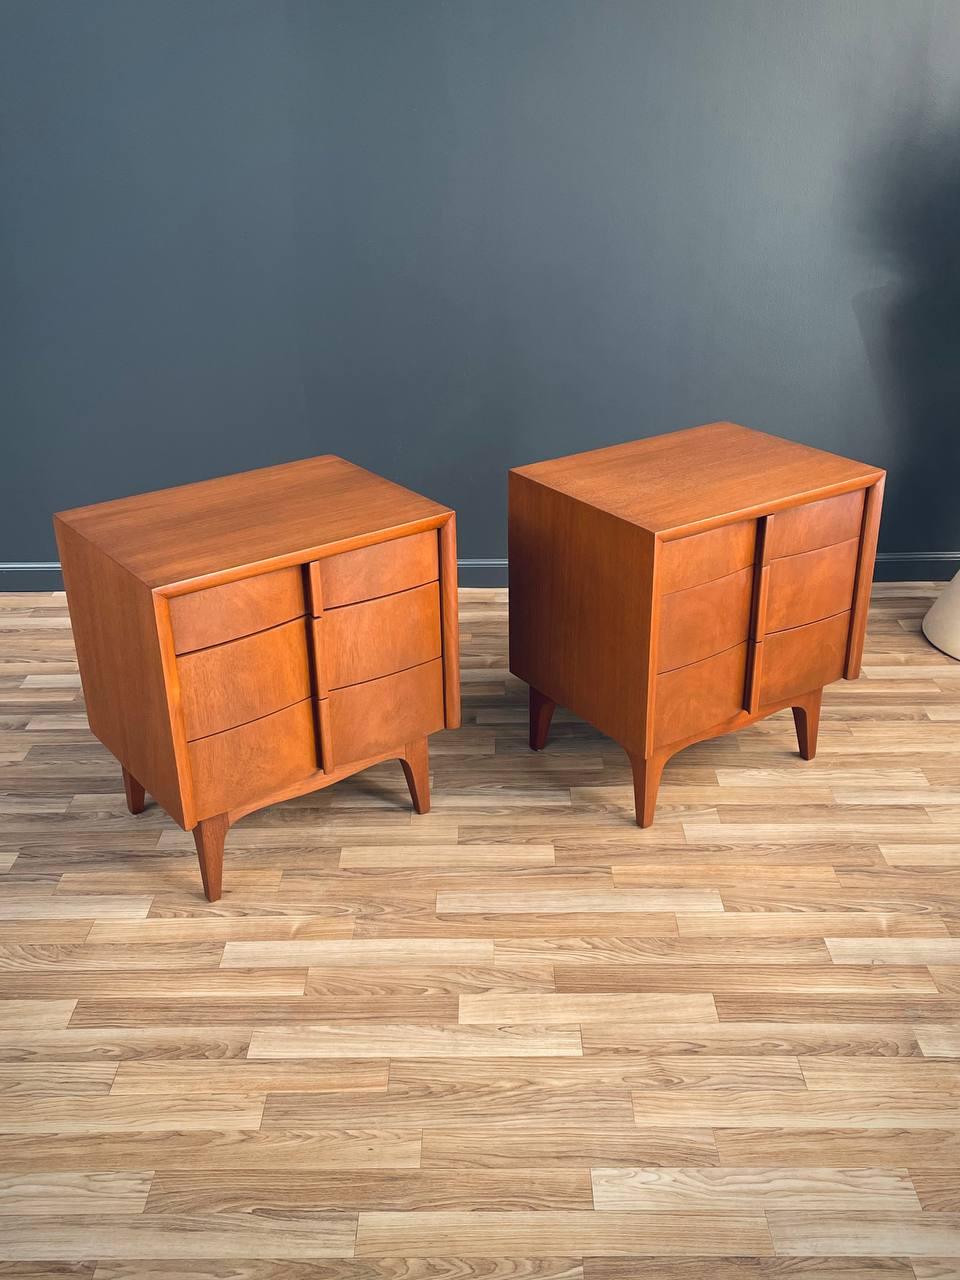 Newly Refinished - Pair of Mid-Century Modern Walnut Night Stands  In Excellent Condition For Sale In Los Angeles, CA